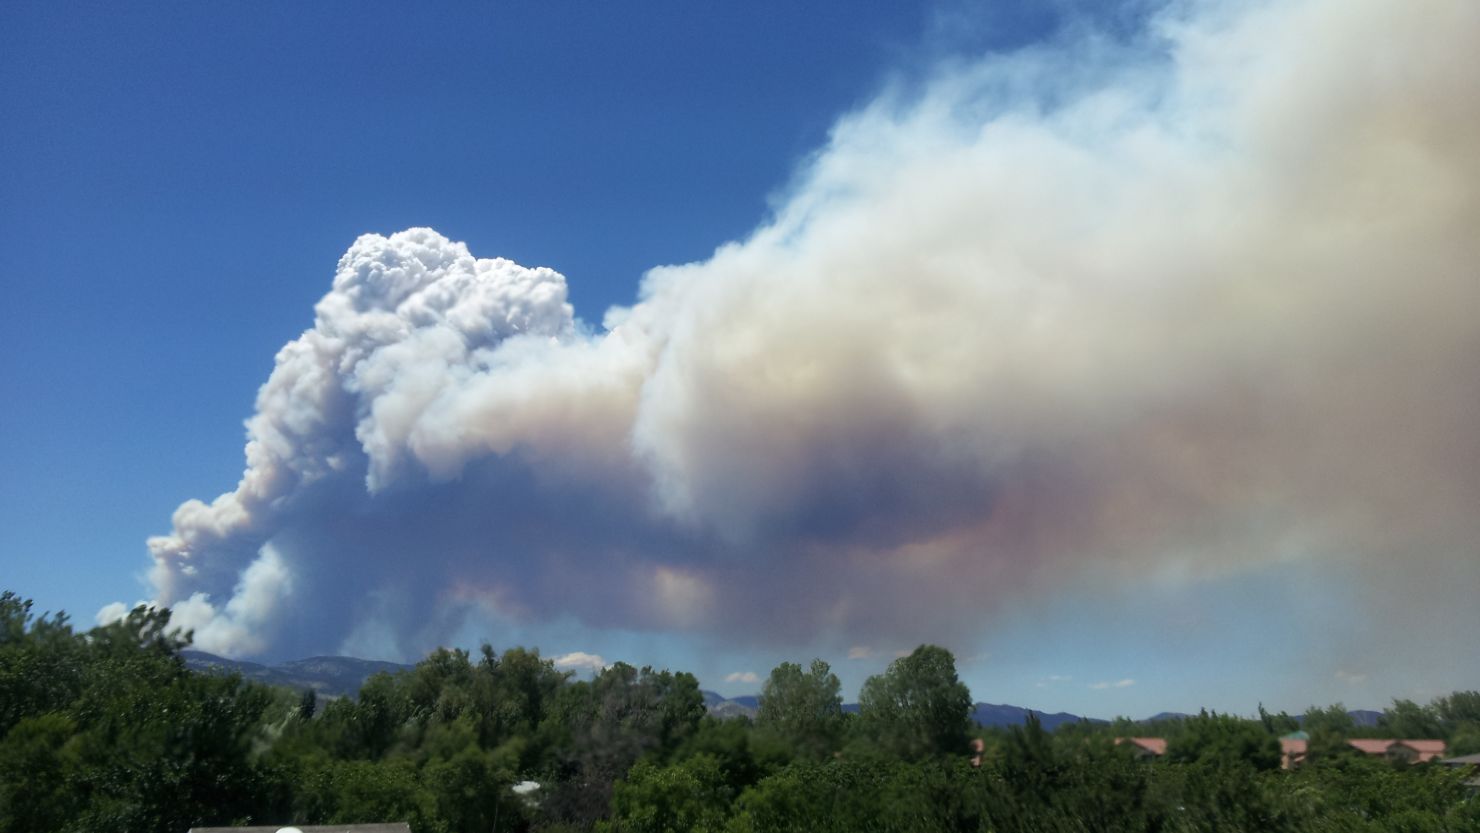 Smoke from the wildfire could be seen near the Colorado State University campus on Saturday.